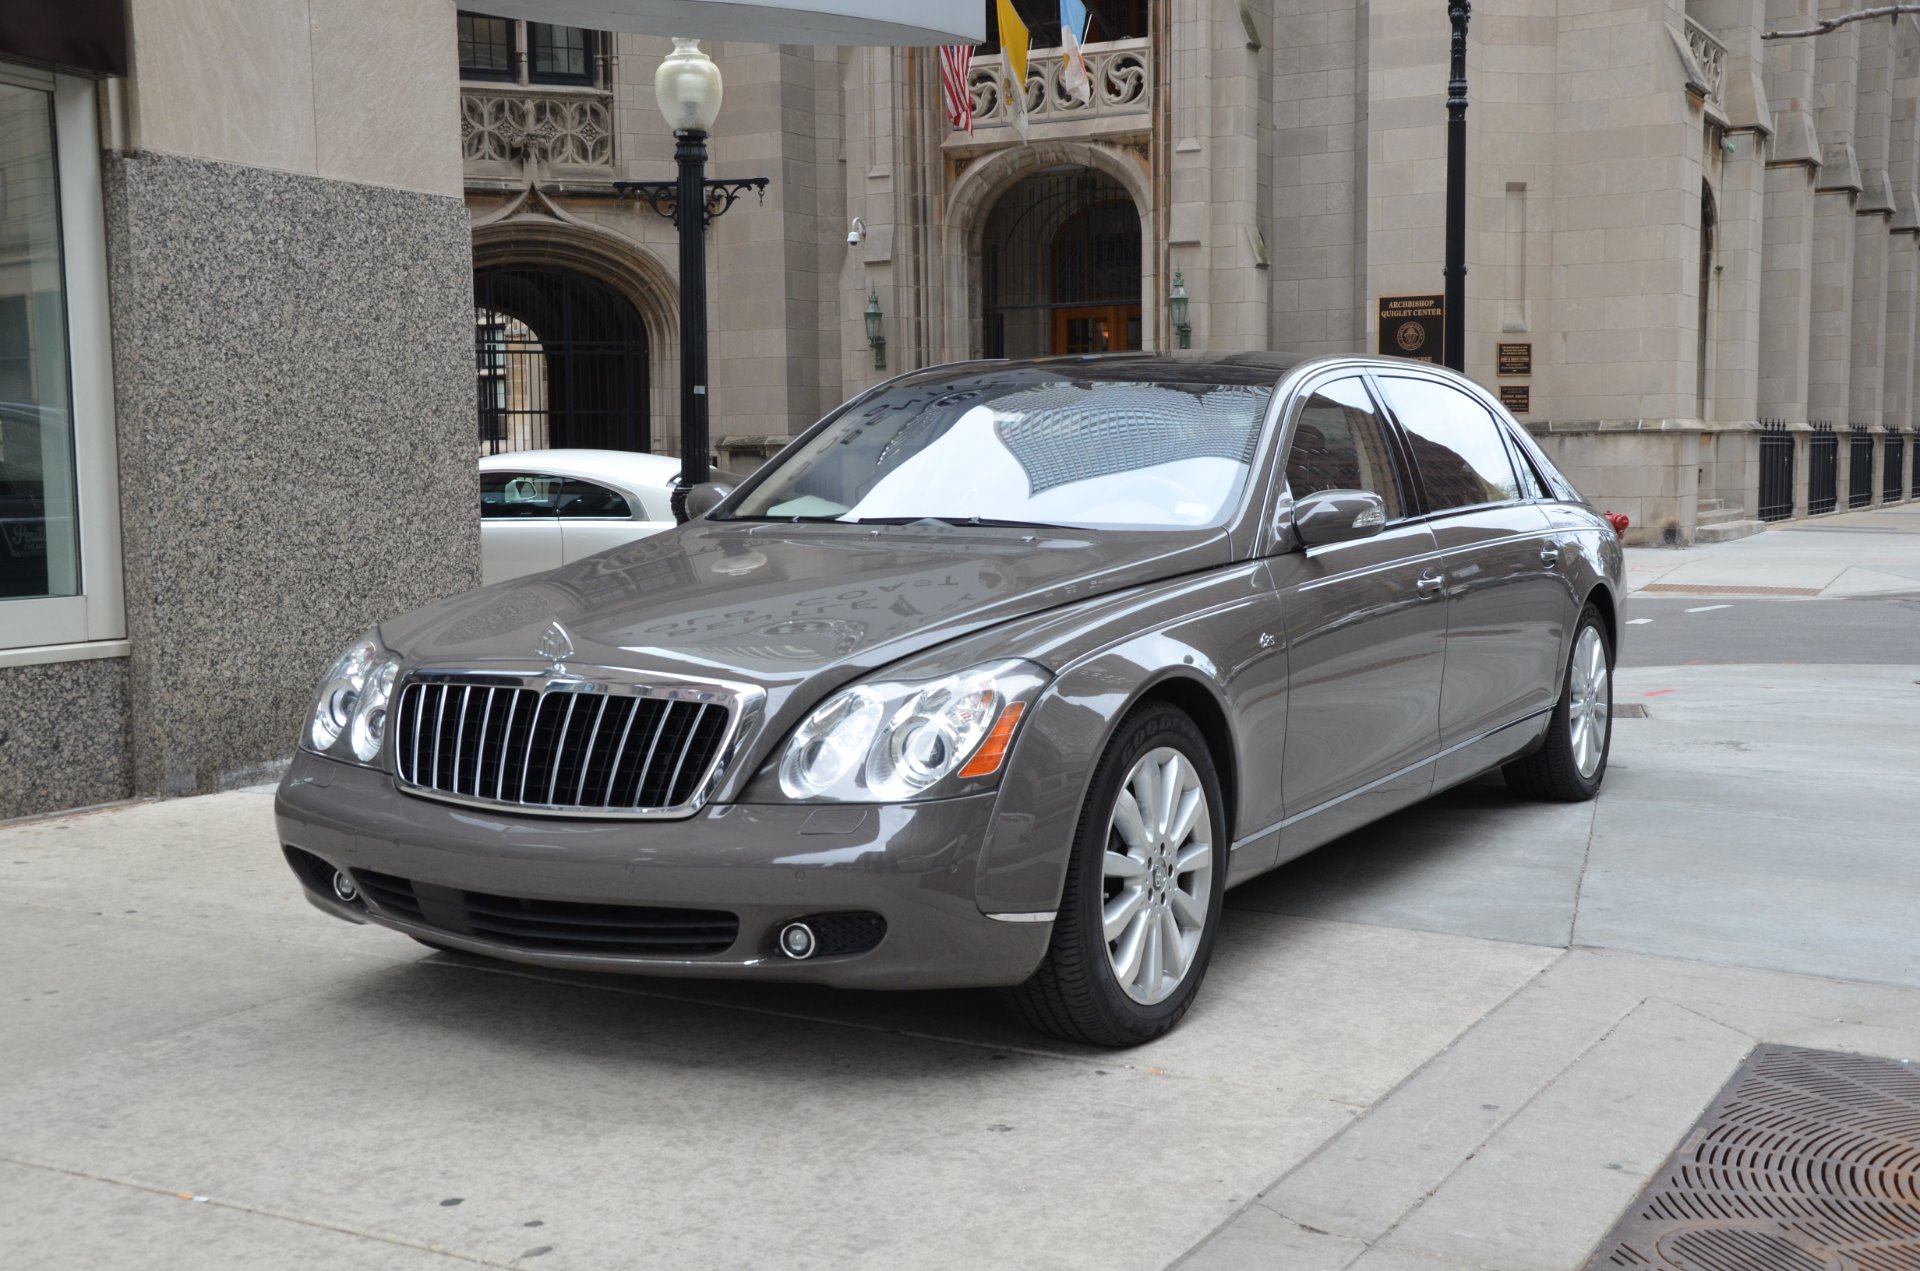 2009 Maybach 62 S Stock # 02498 for sale near Chicago, IL | IL Maybach  Dealer